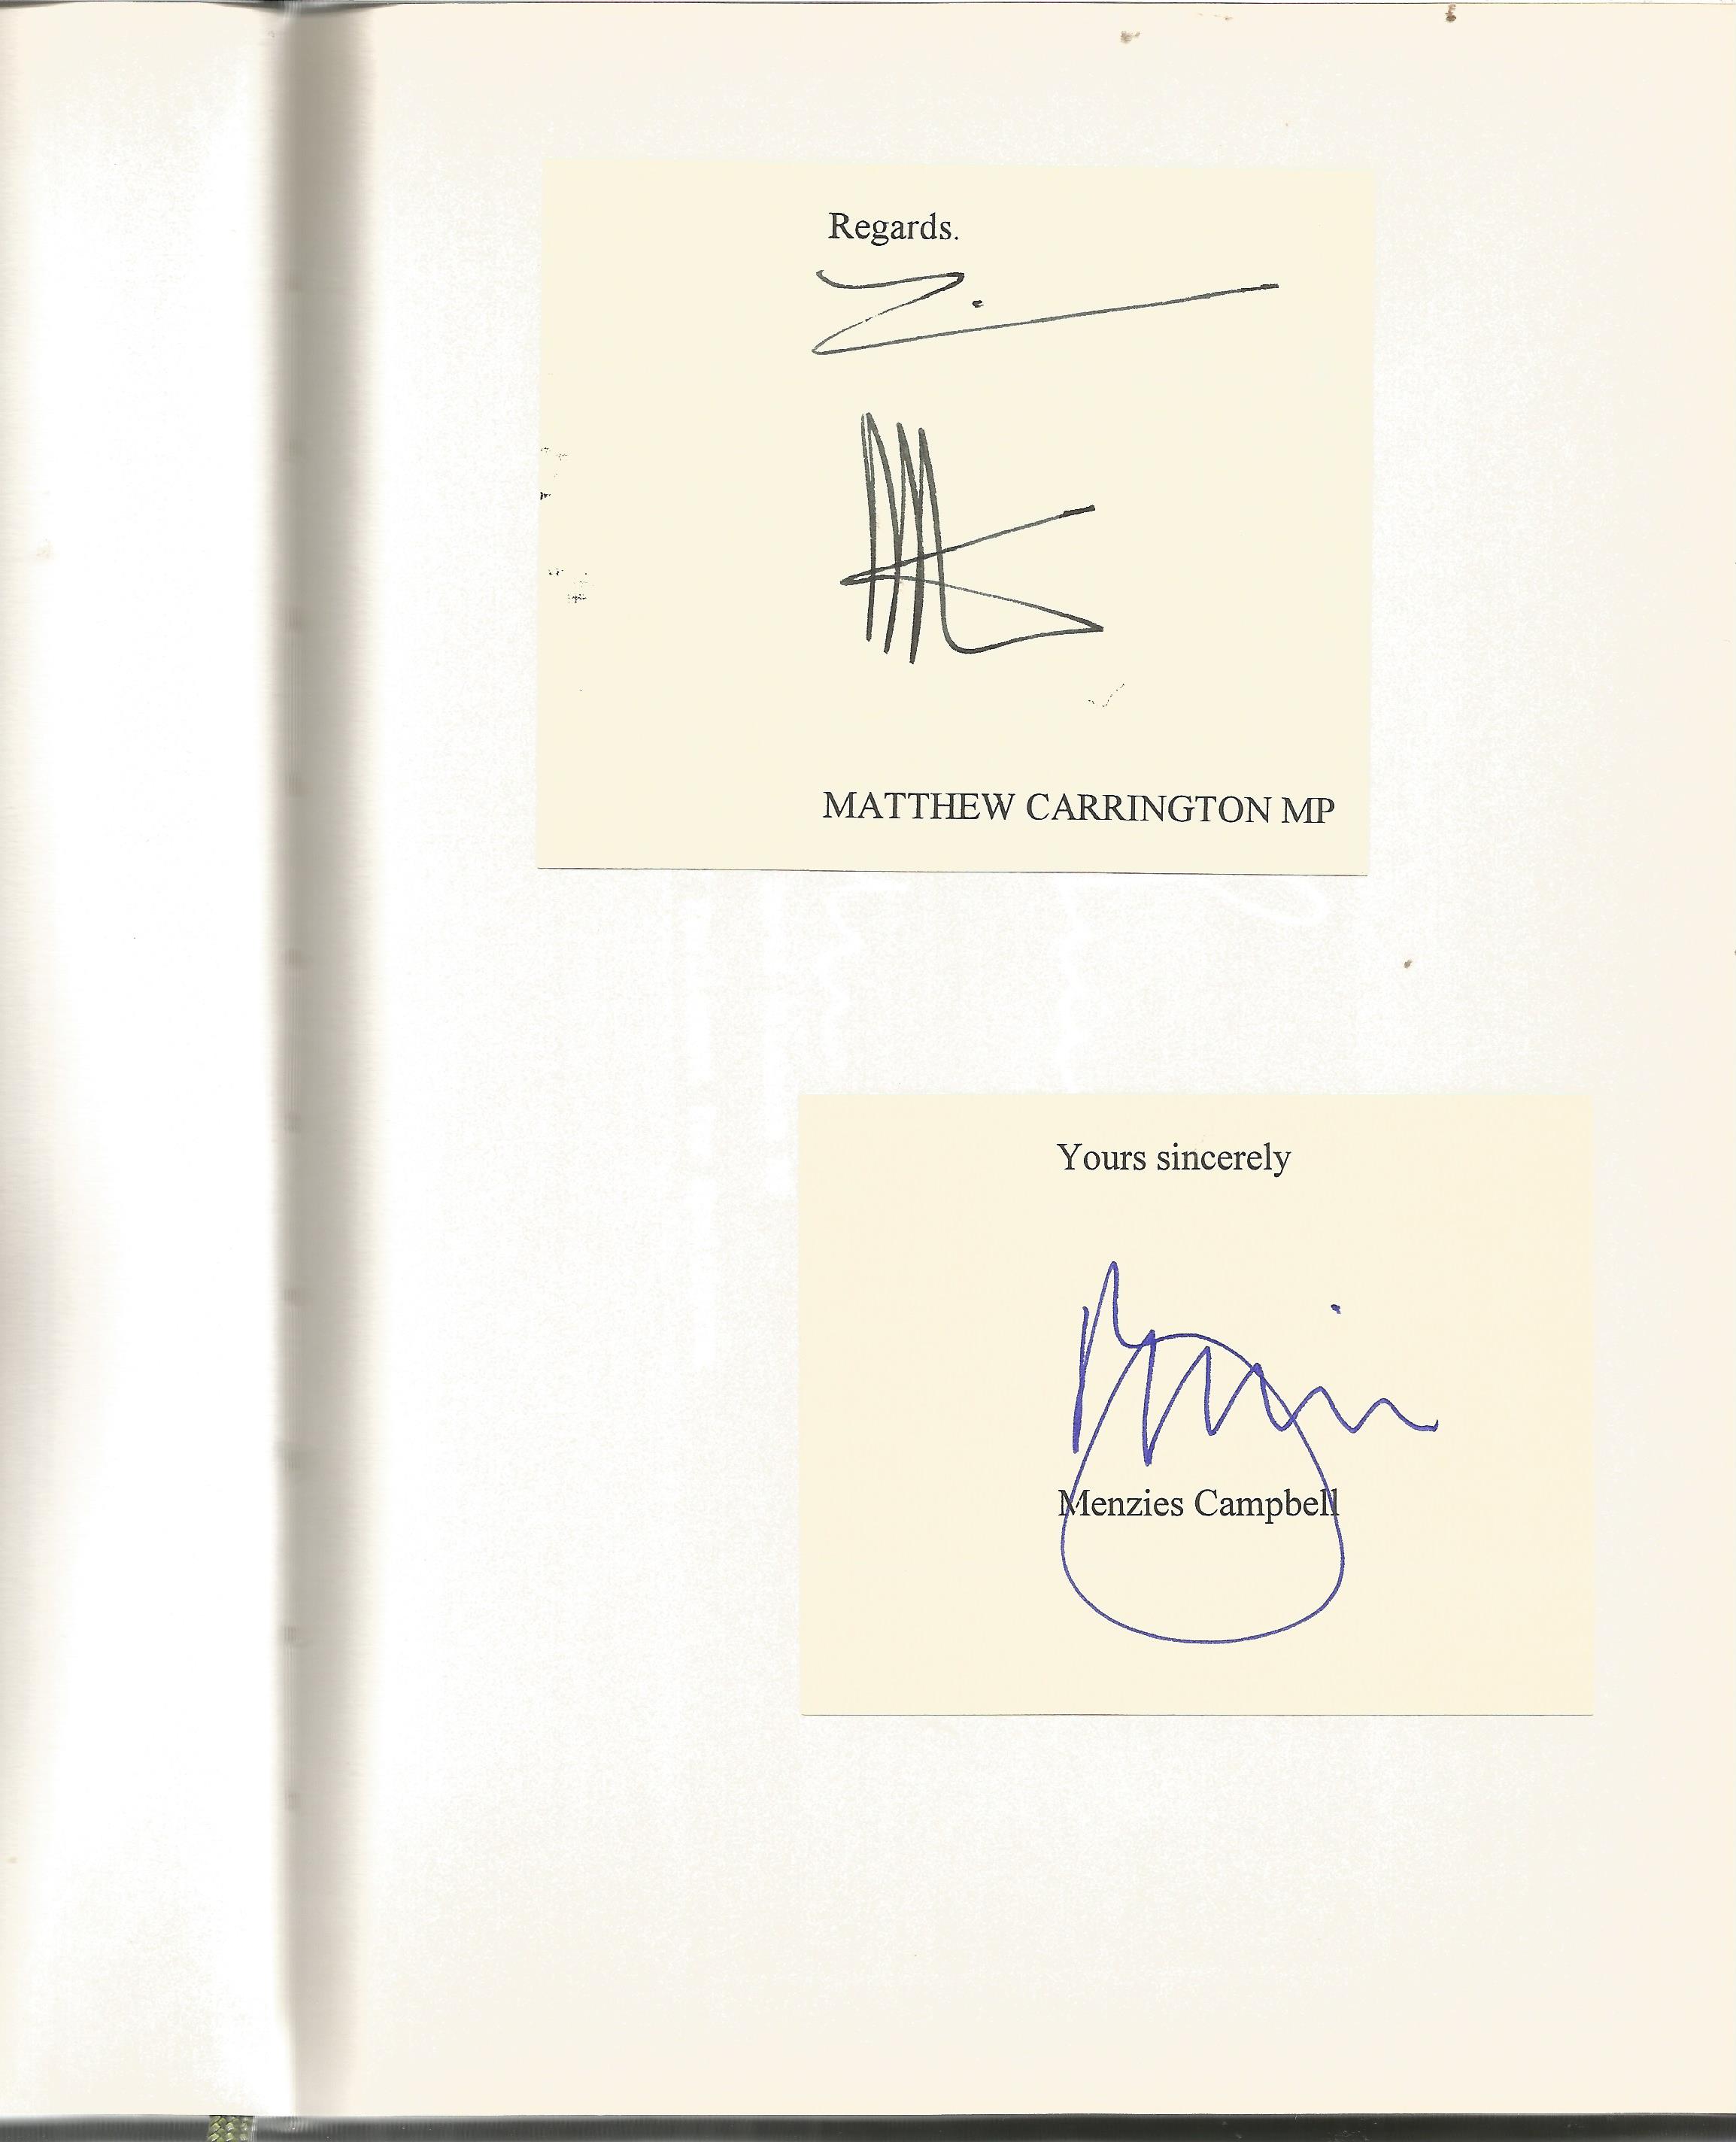 Assorted Political signatures attached inside notebook. Some of signatures included are Paddy - Image 5 of 5